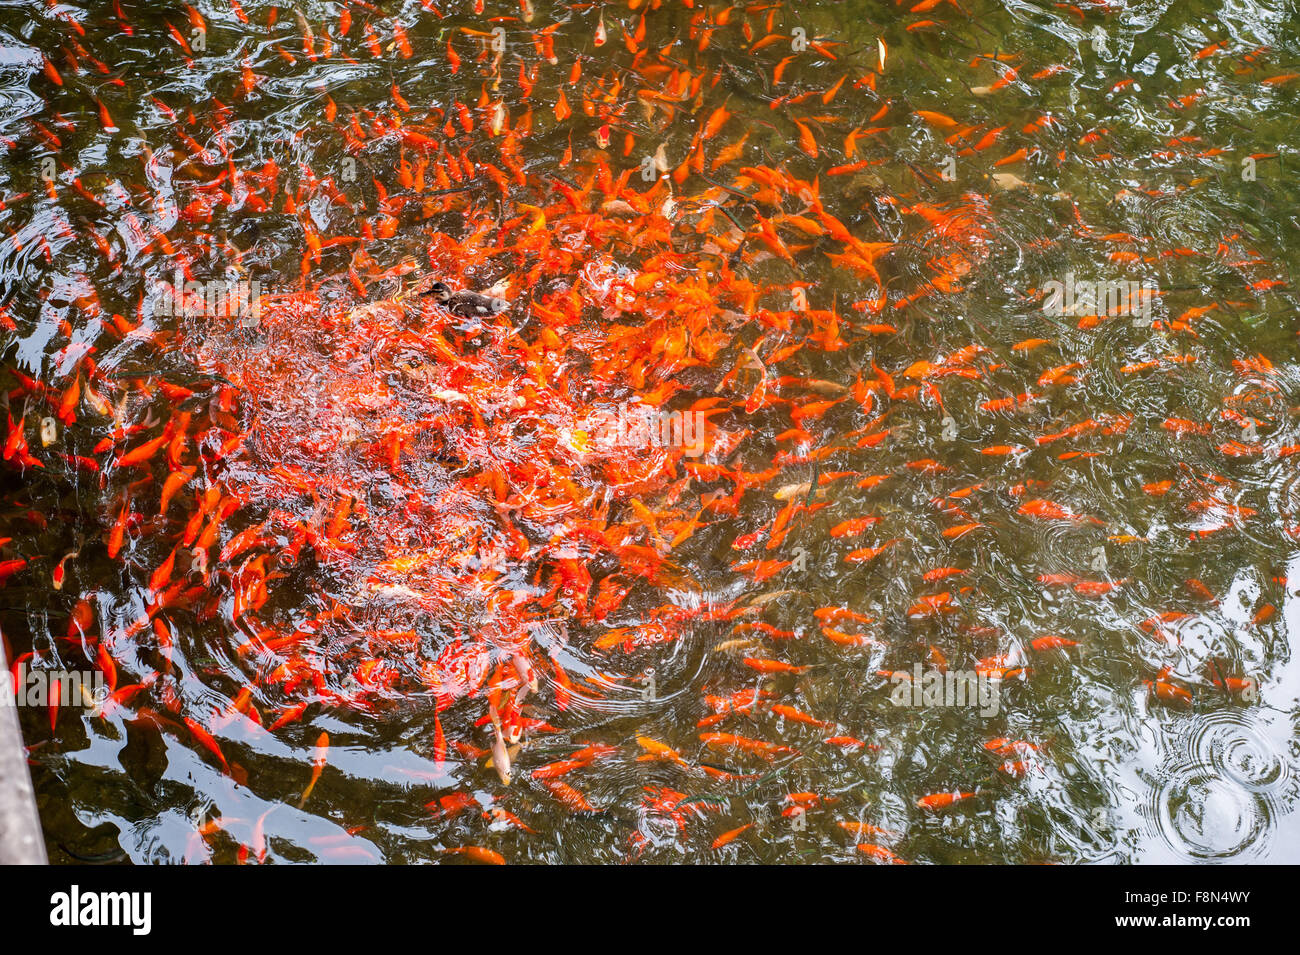 Many gold fish schooling in pond Stock Photo